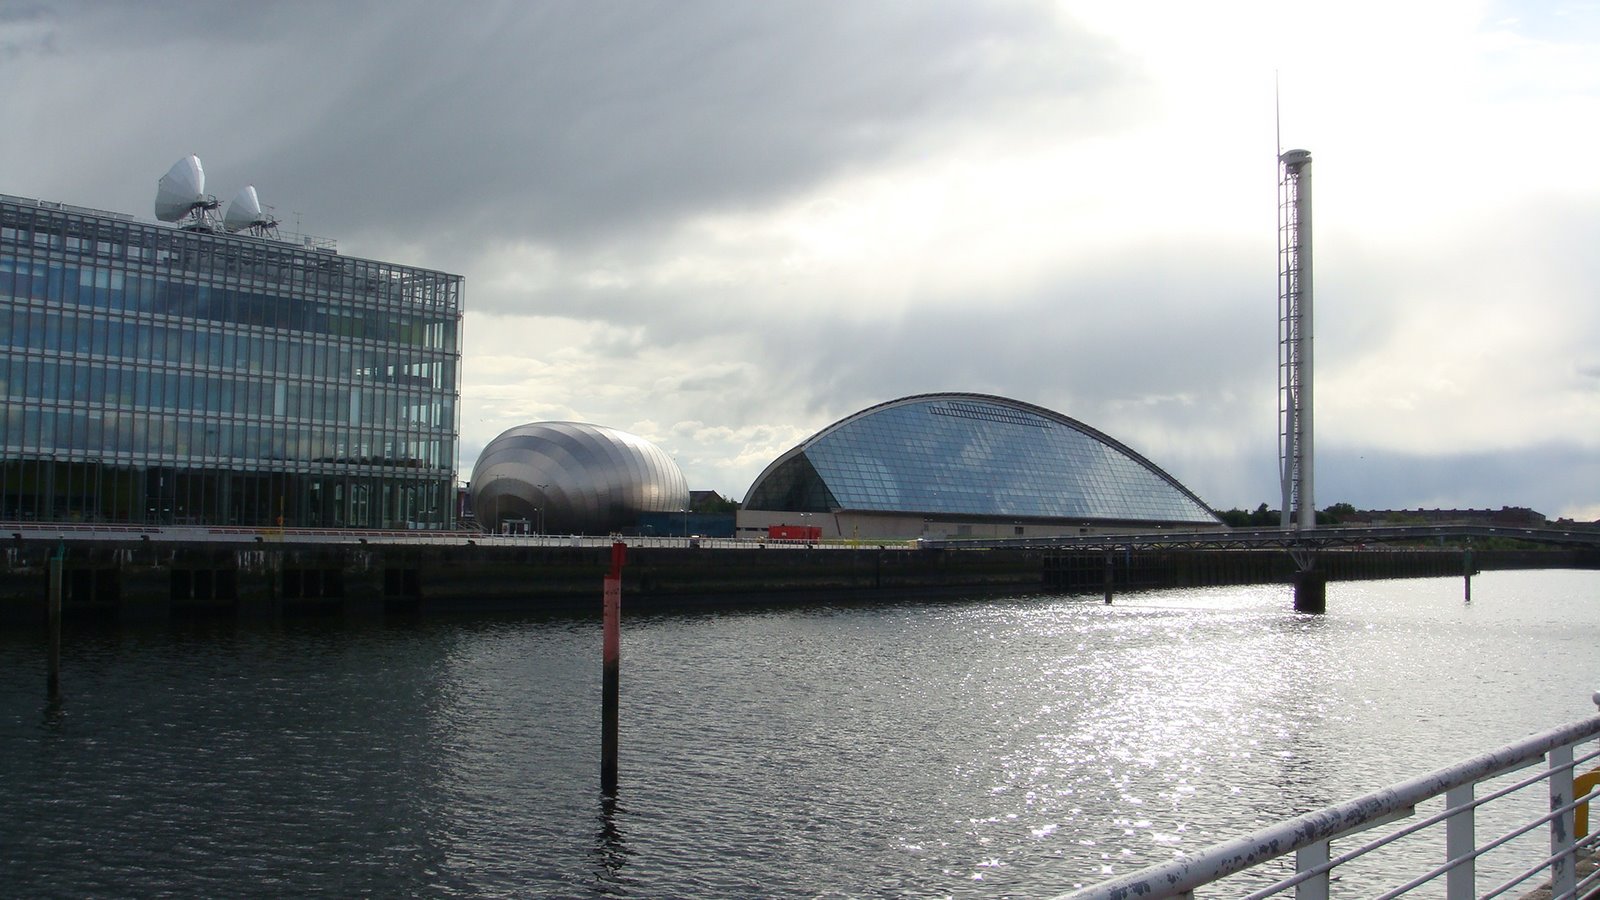 [The+River+Clyde+Glasgow+2.JPG]